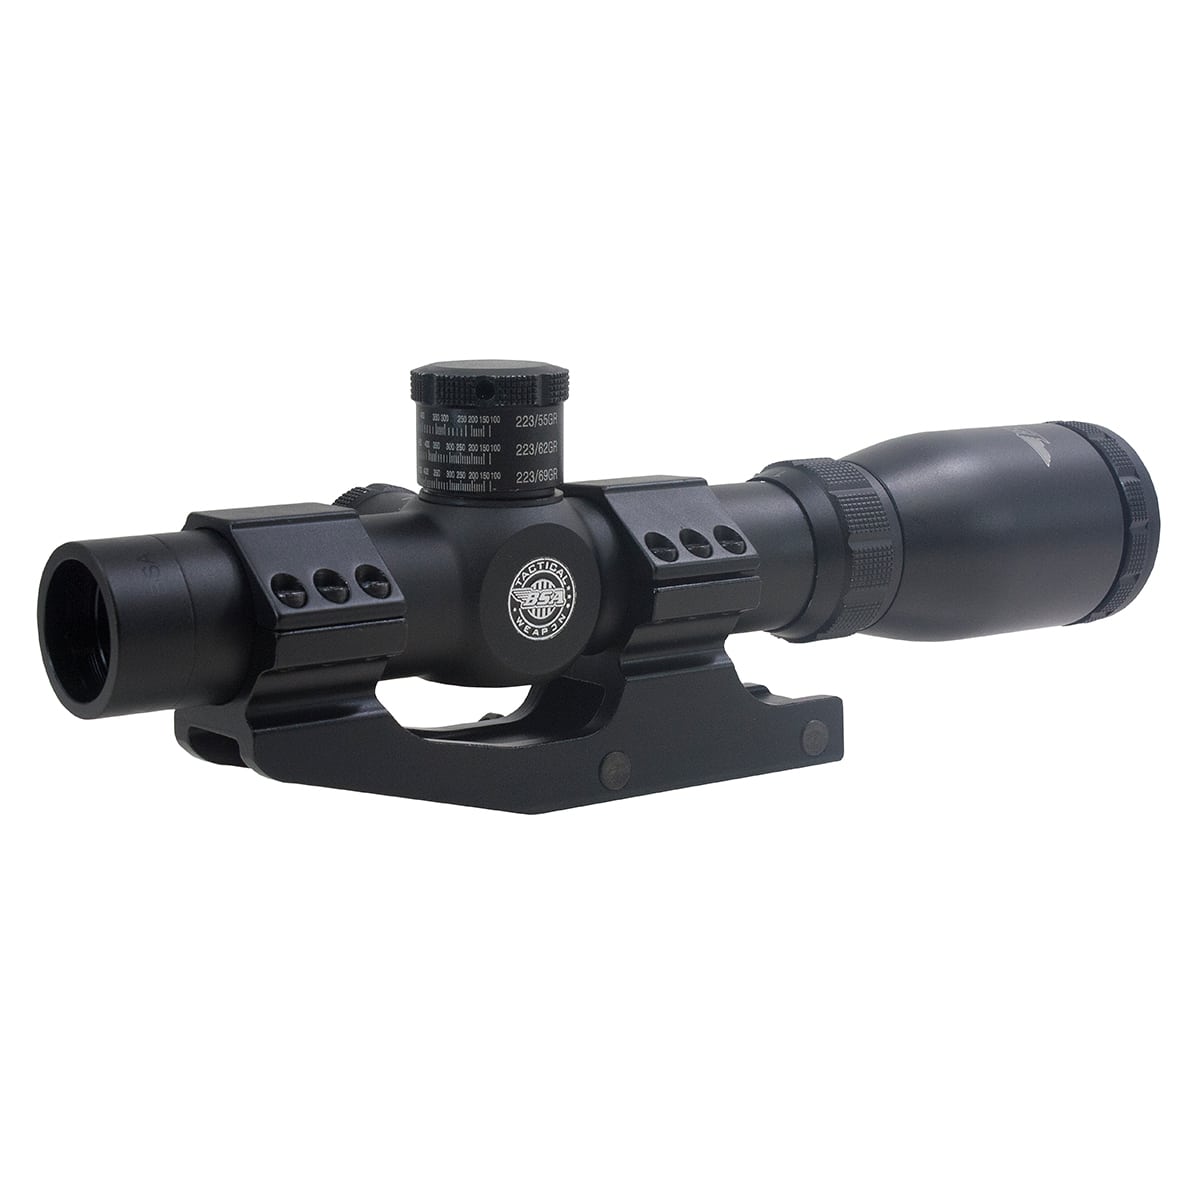 BSA Optics Tactical Weapon 1-4X24mm Scope for tactical firearms